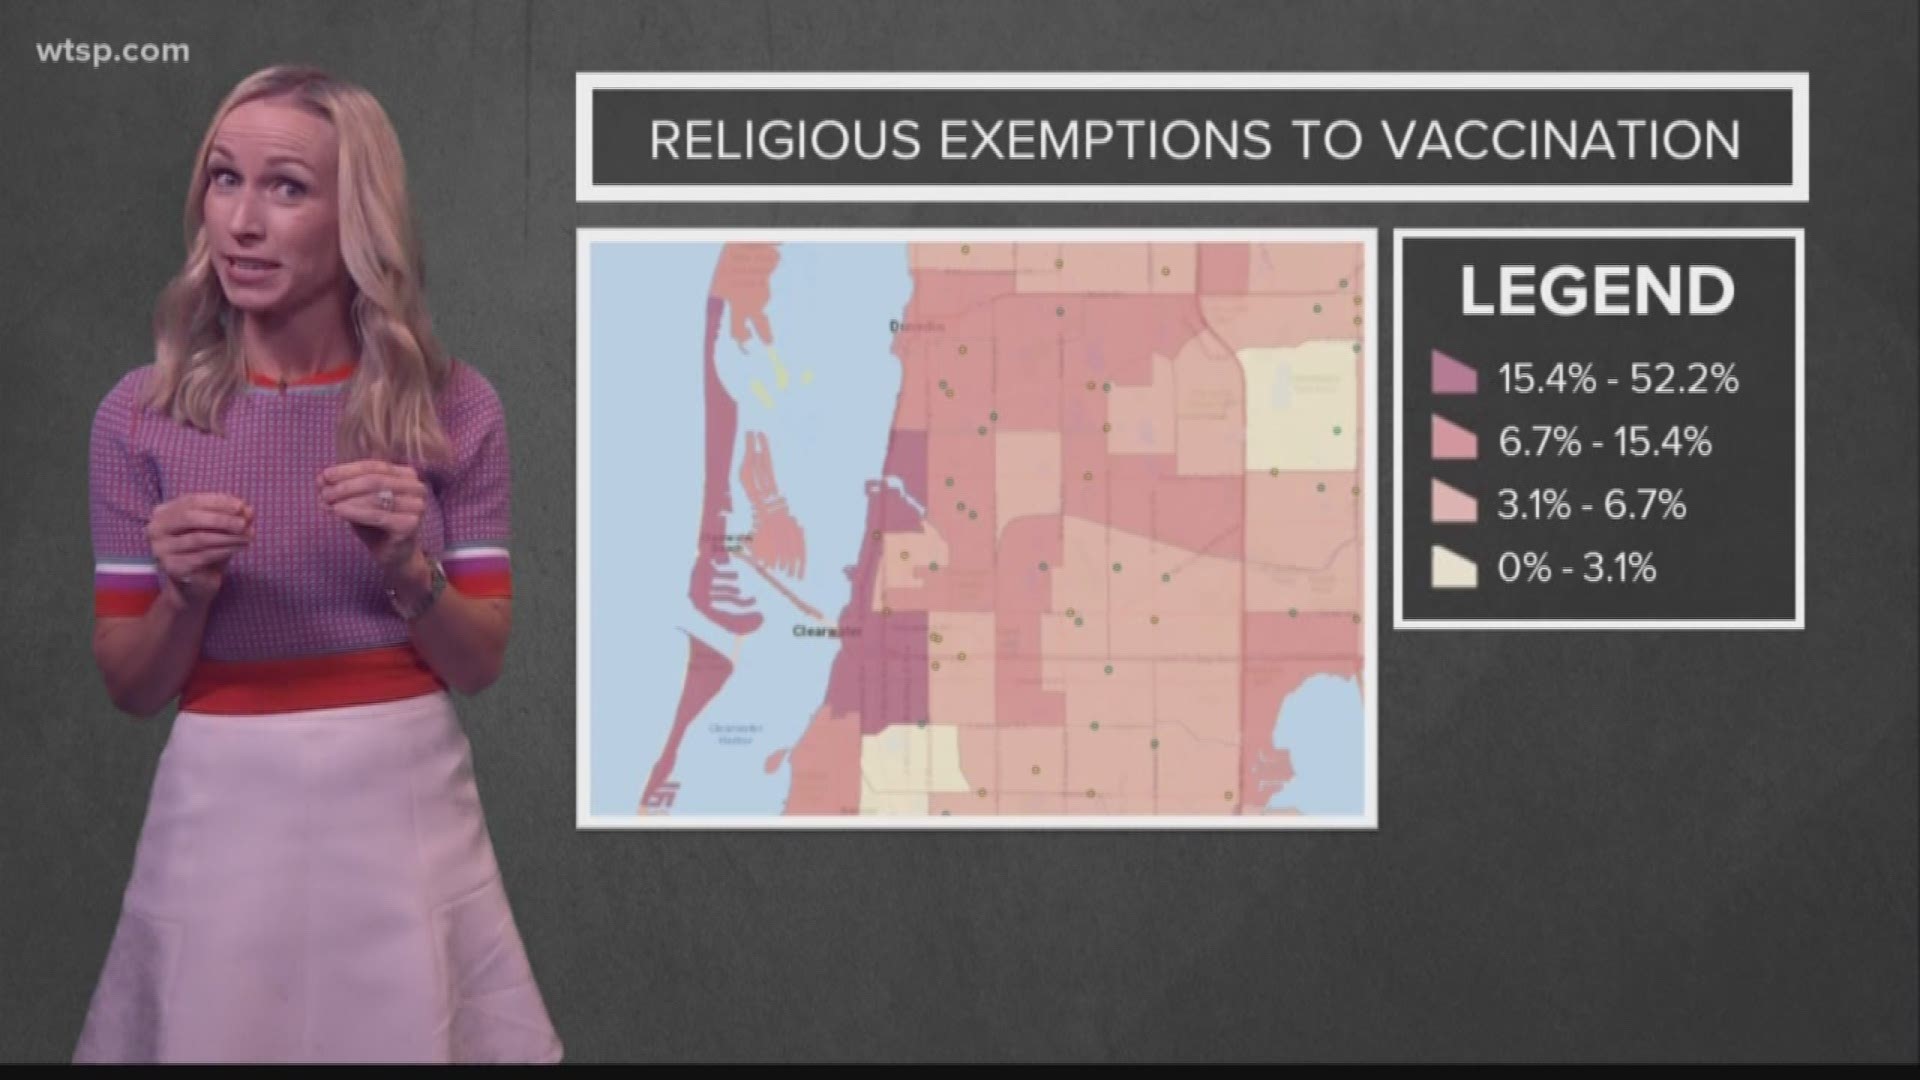 The Florida Department of Health provides an interactive map that allows you to see how prevalent religious exemptions from vaccinations are where you live.

As the legend indicates, the darker the color, the more kids with religious exemptions in a particular cluster.